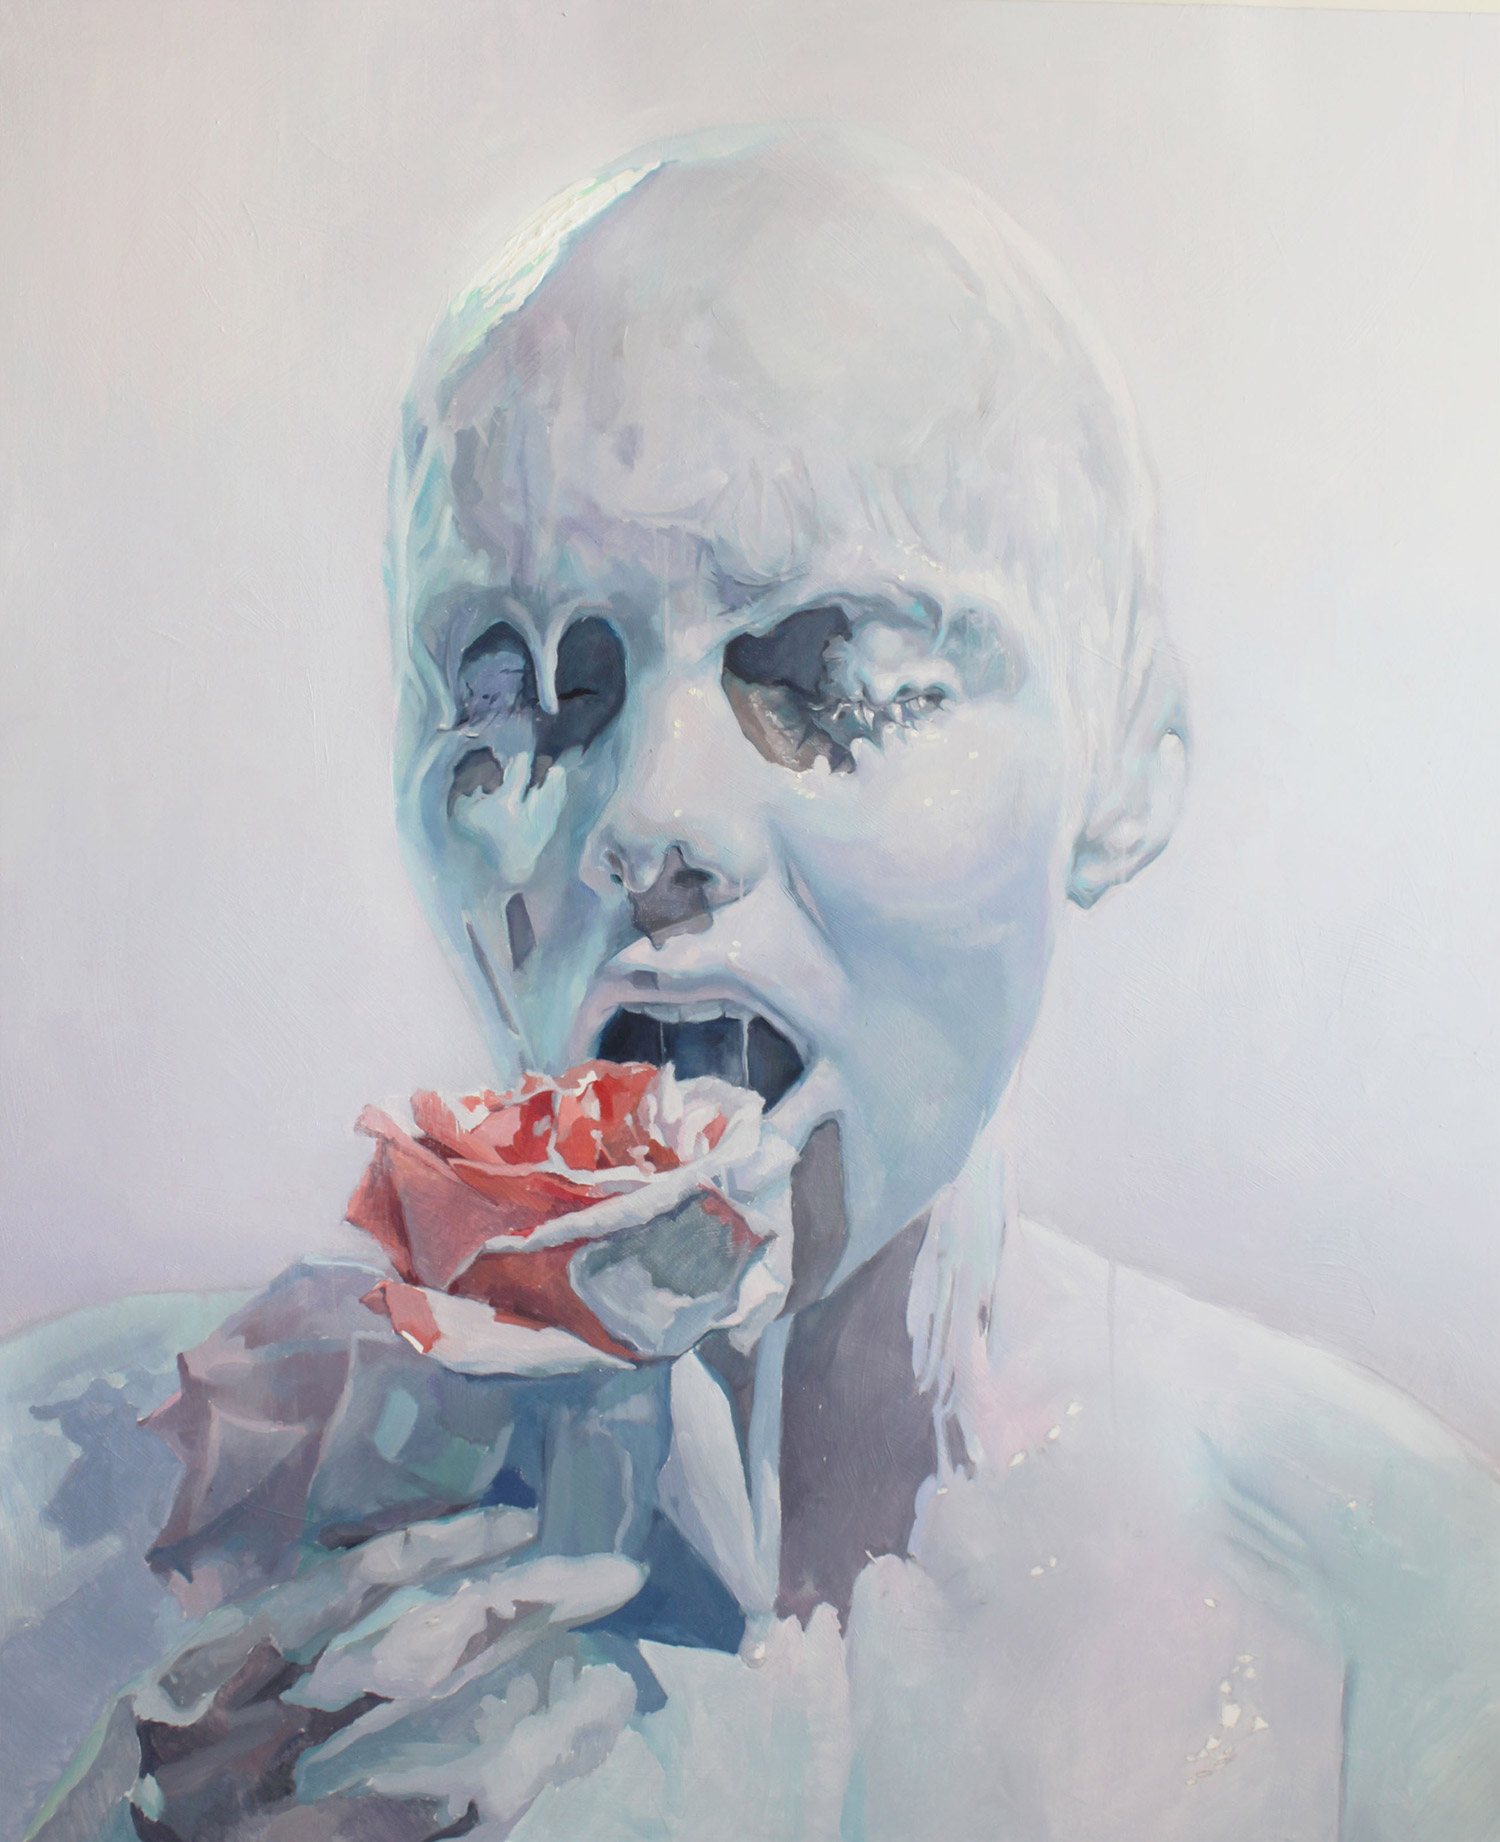 Ivan Alifan, Not Milk, figure covered in milky substance holding a rose